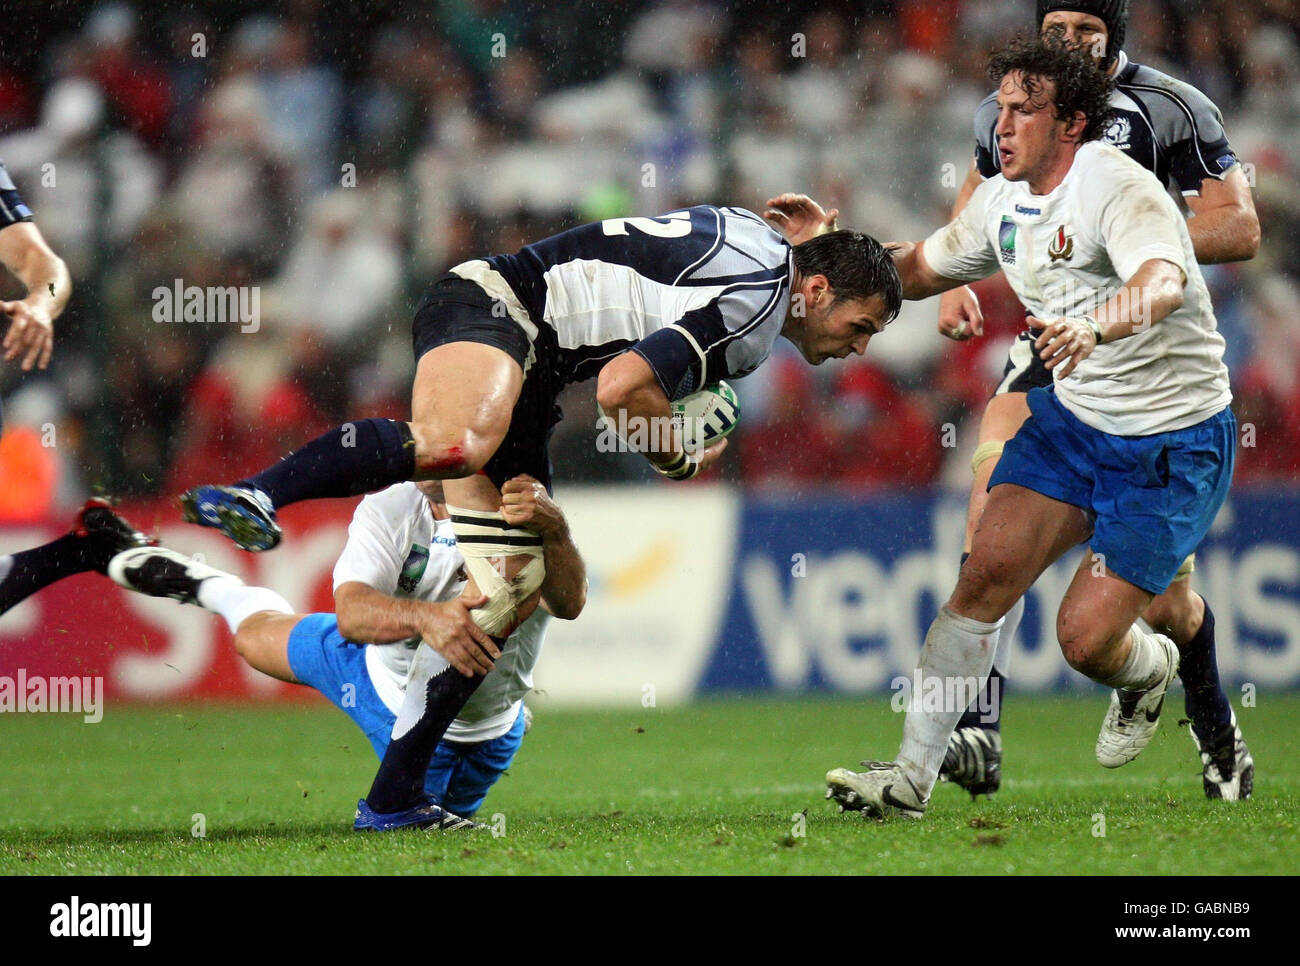 Scotland's Rob Dewey tries to find a way through Italy's defence during the IRB Rugby World Cup Pool C match at Stade Geoffroy-Guichard, St Etienne, France. Stock Photo